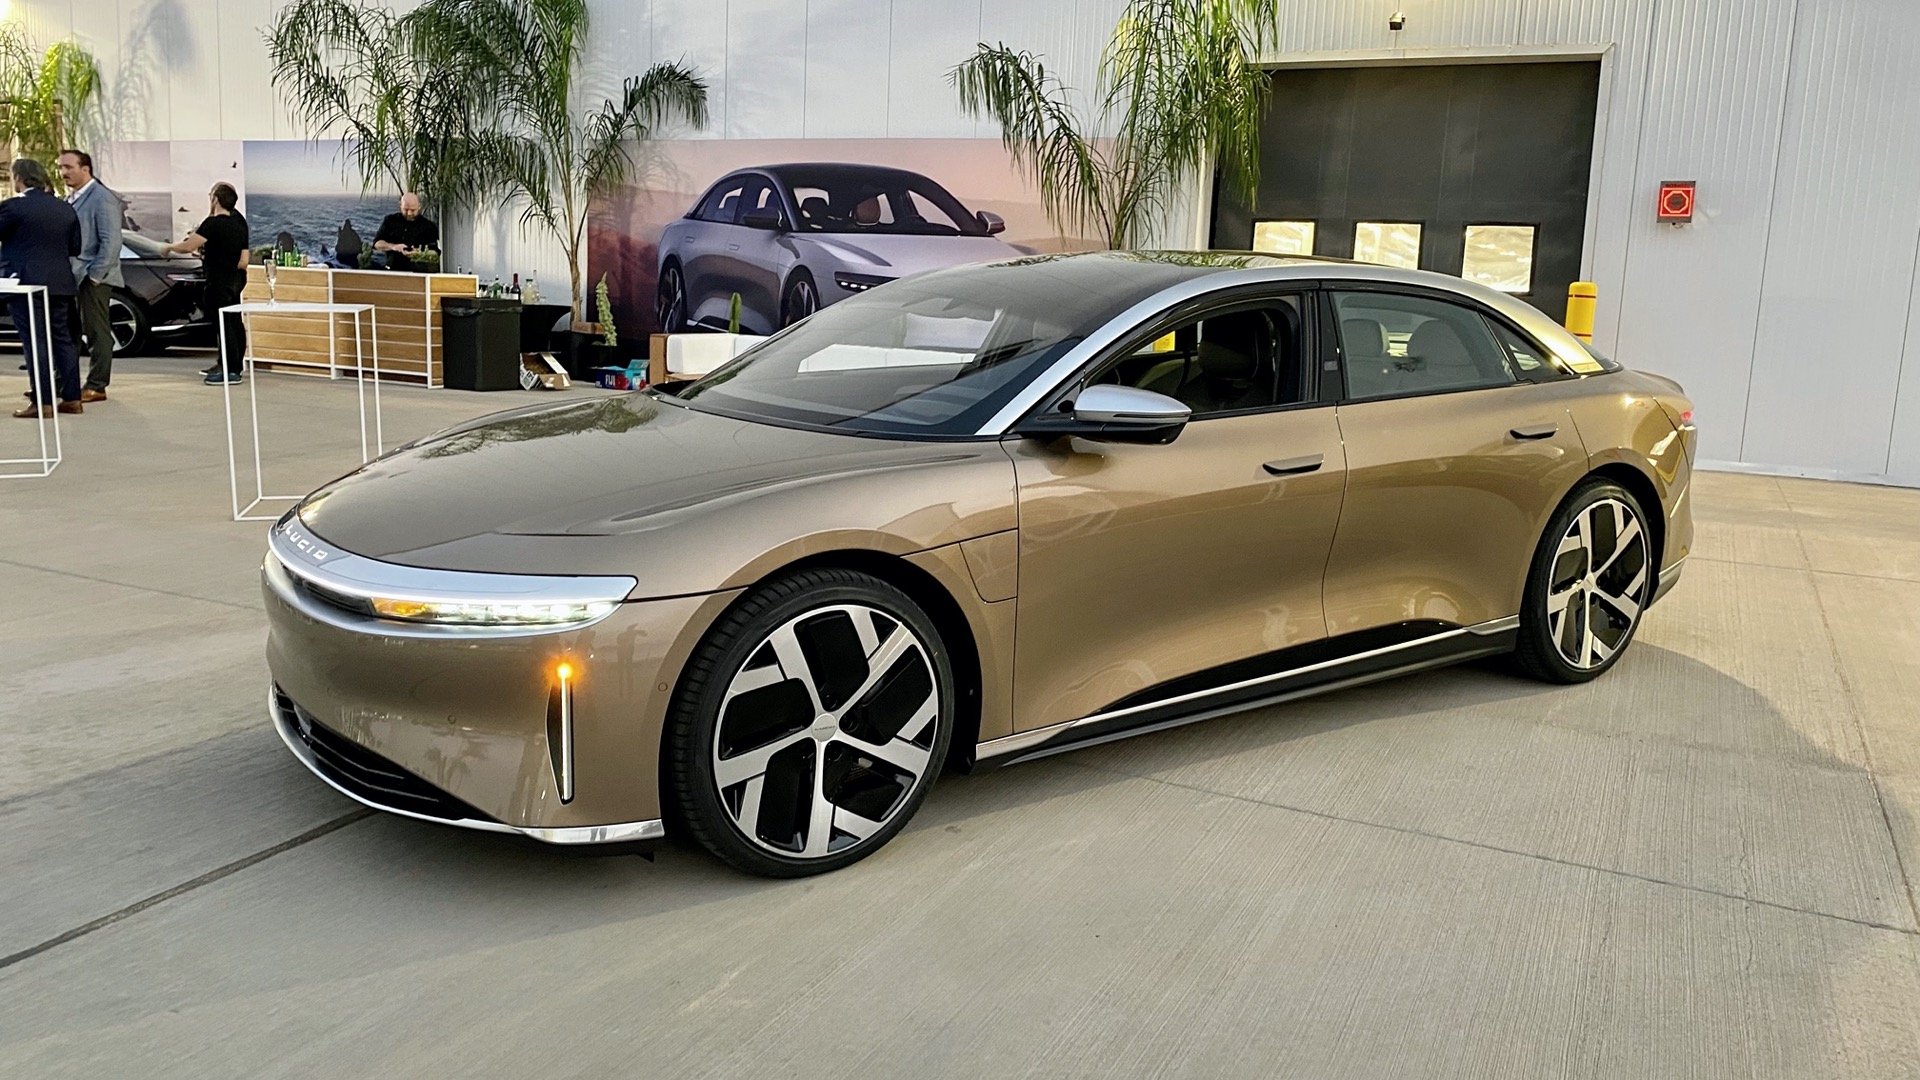 Meet the New Luxury Electric Car That Finally Rivals Tesla